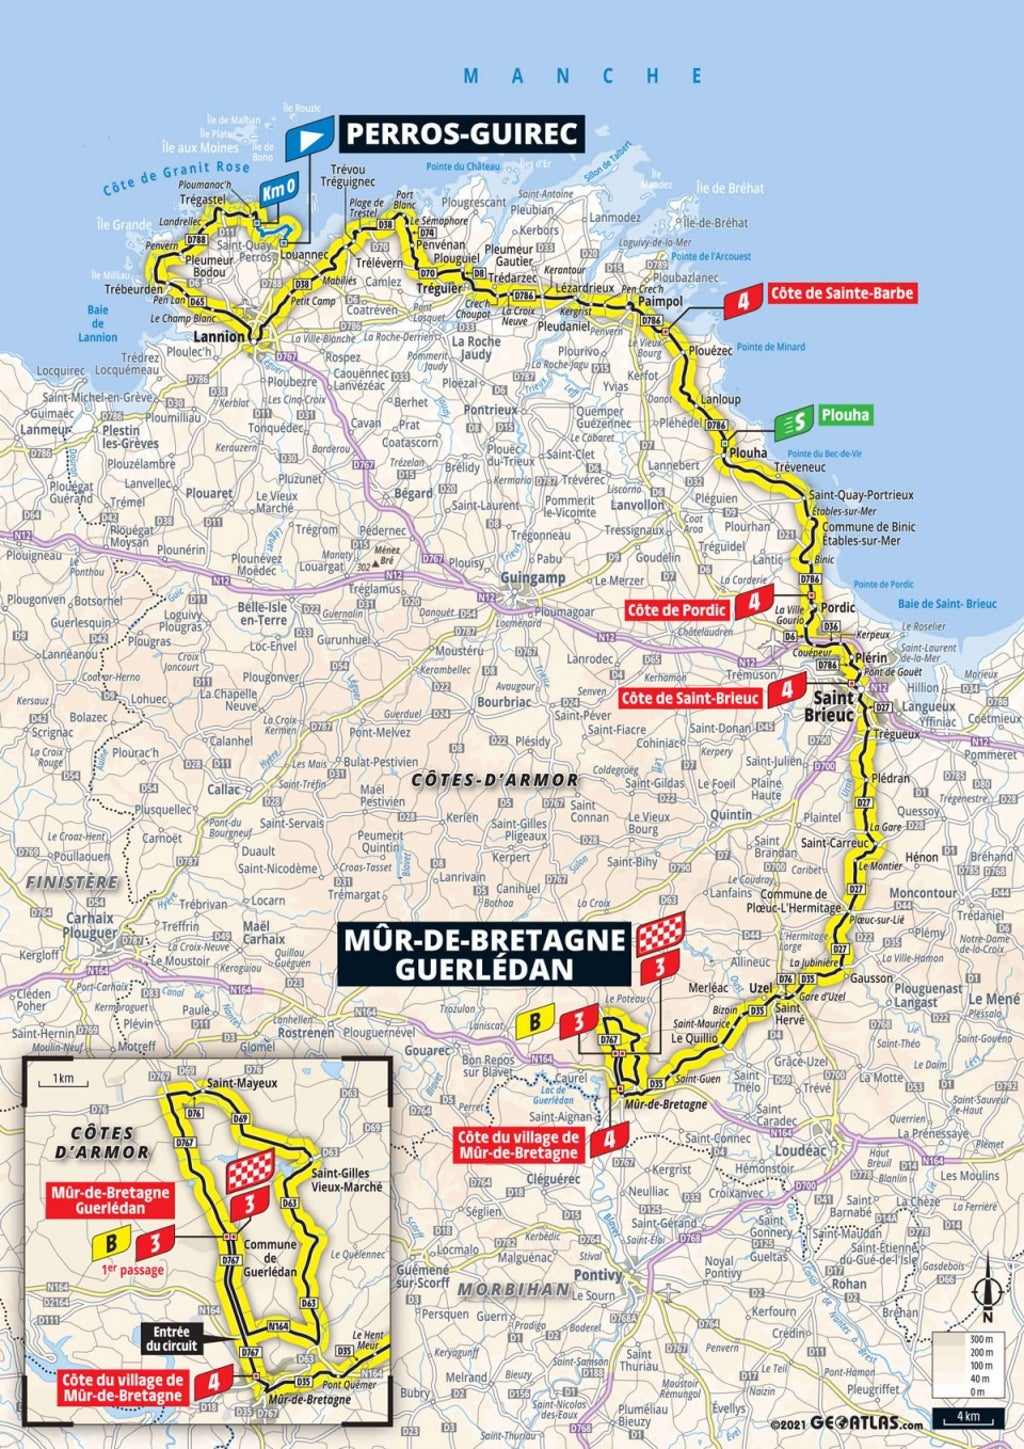 Tour de France 2021 Stage 2 route map, preview, prediction and start